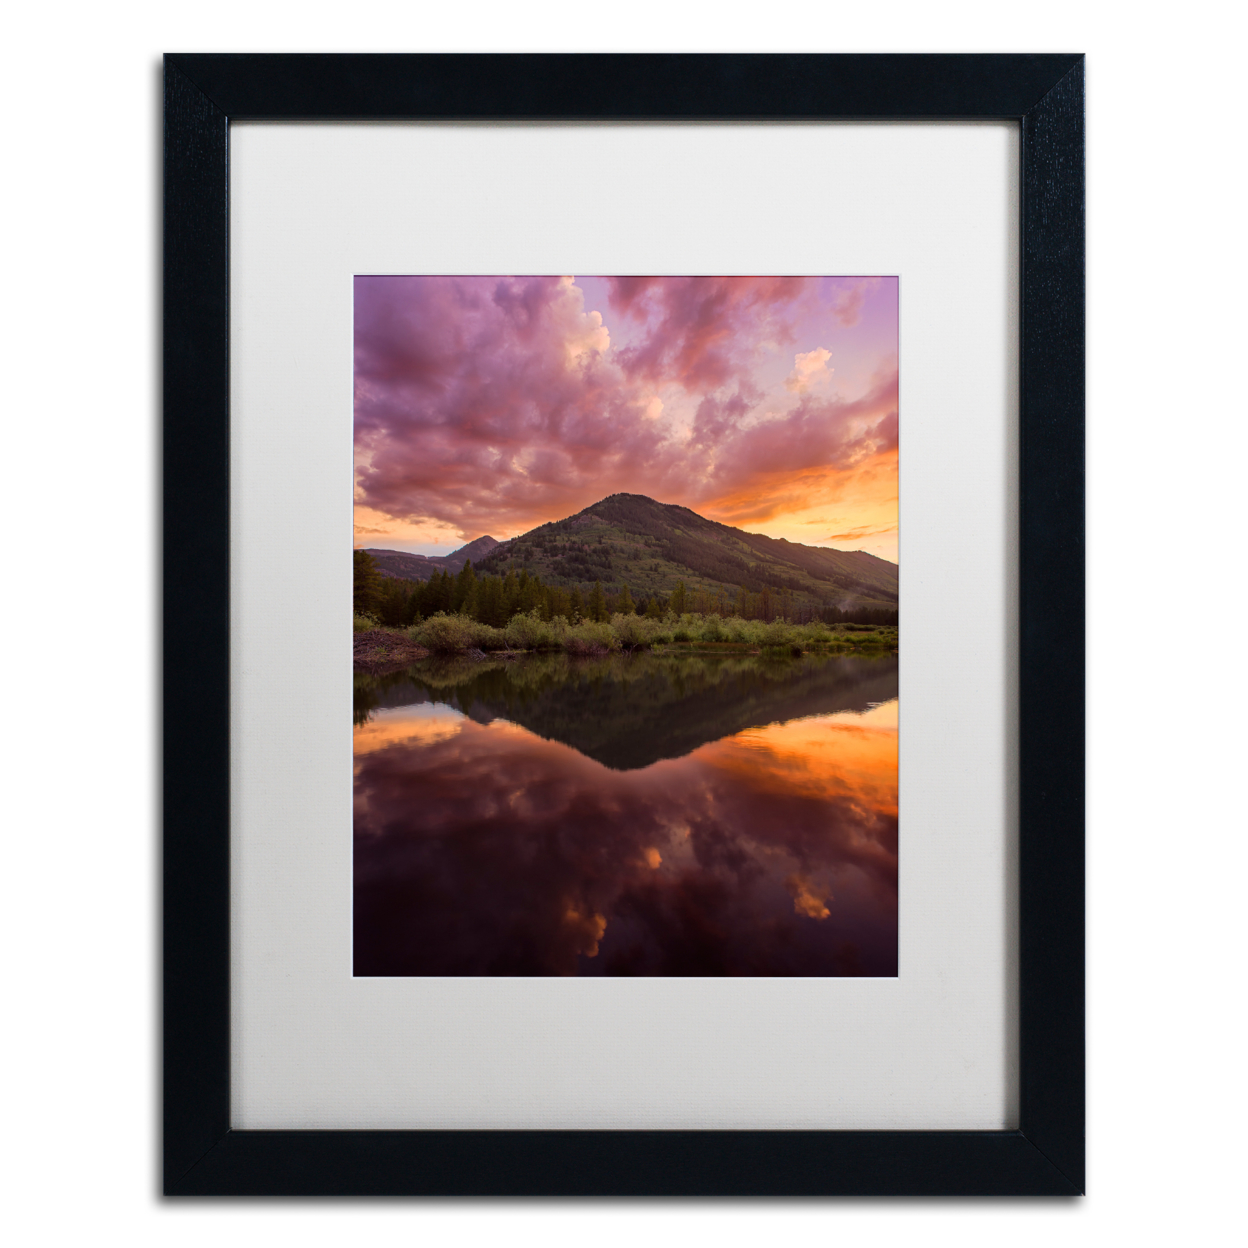 Michael Blanchette Photography 'Glamor In The Sky' Black Wooden Framed Art 18 X 22 Inches